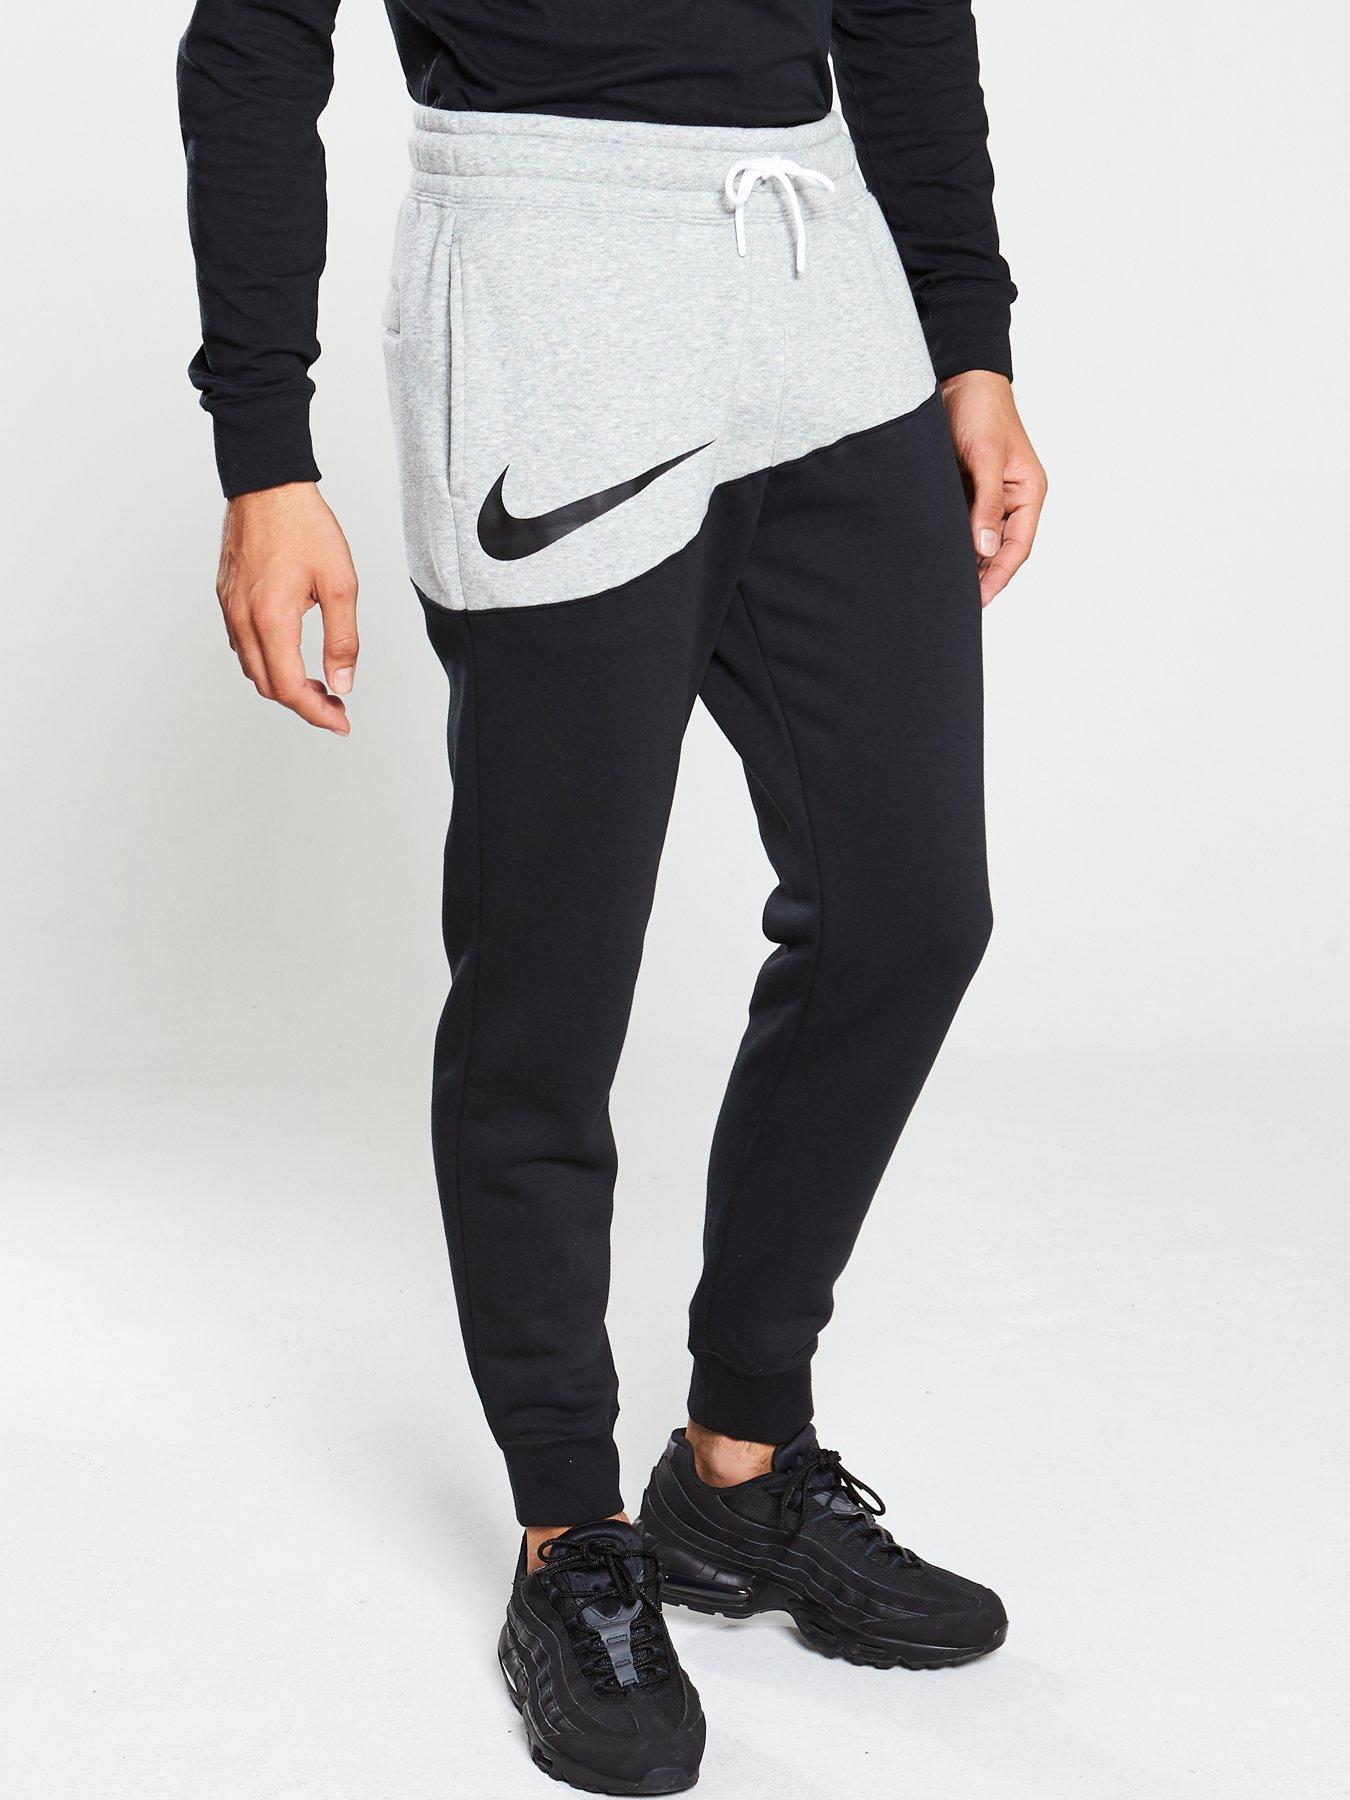 black and grey nike joggers